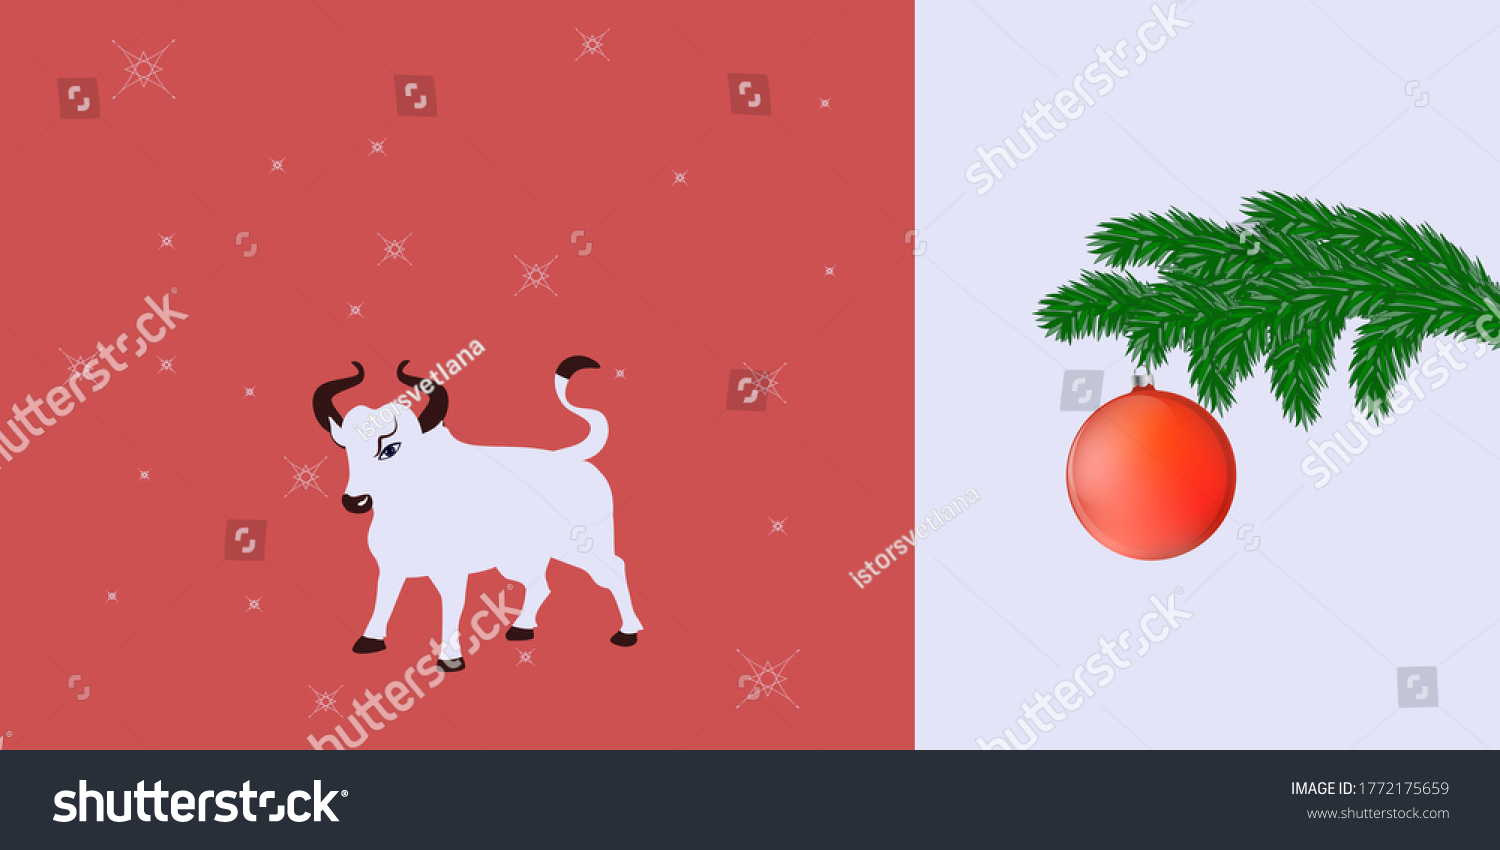 SVG of New Year banner - goby, spruce branch, Christmas ball - red and white background - vector. svg